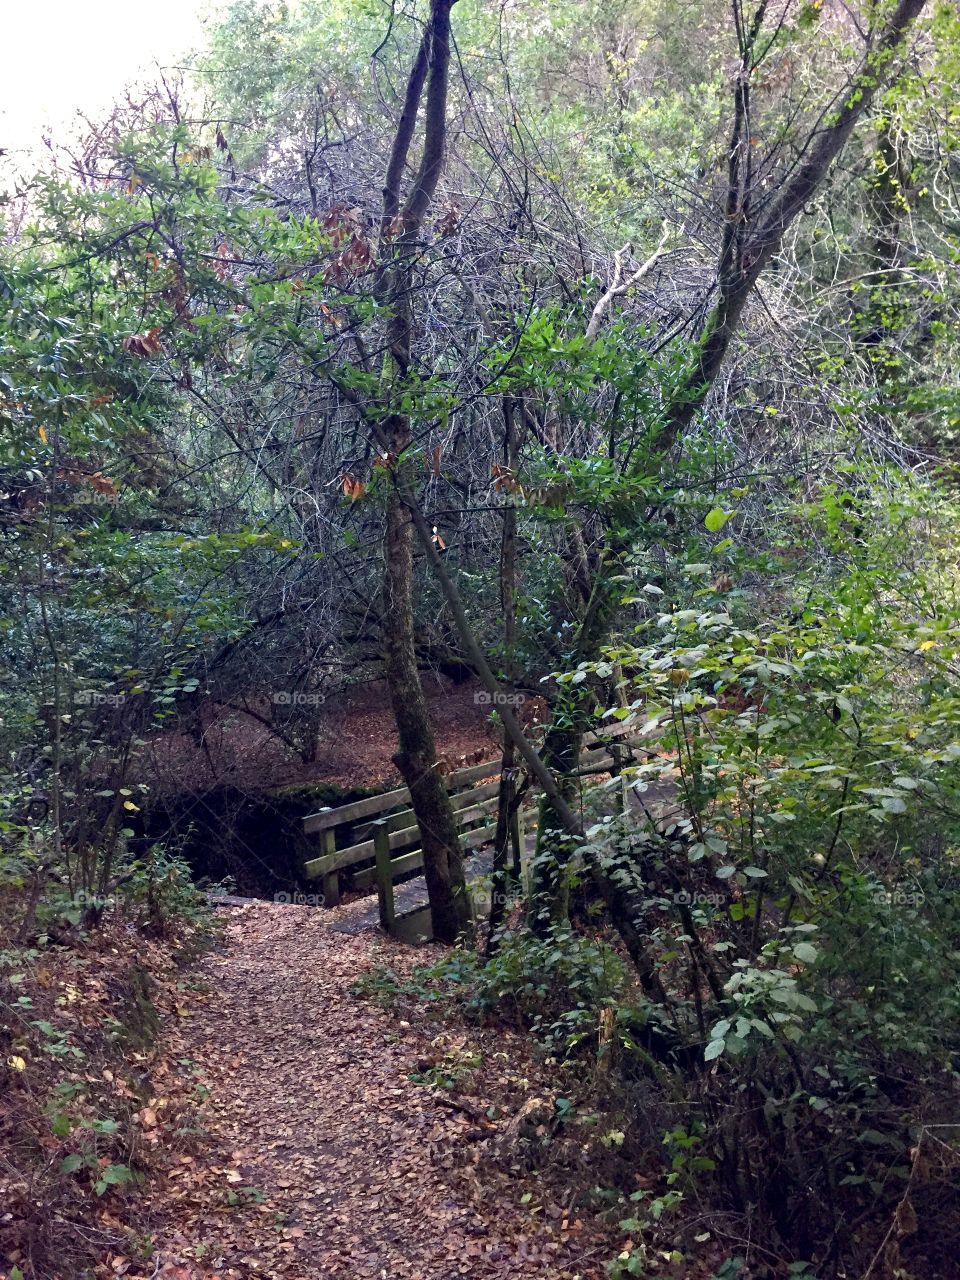 Bridge on a hiking trail in Redwood Regional Park.  This is entering a Grove coming down from the top of the highest hill 